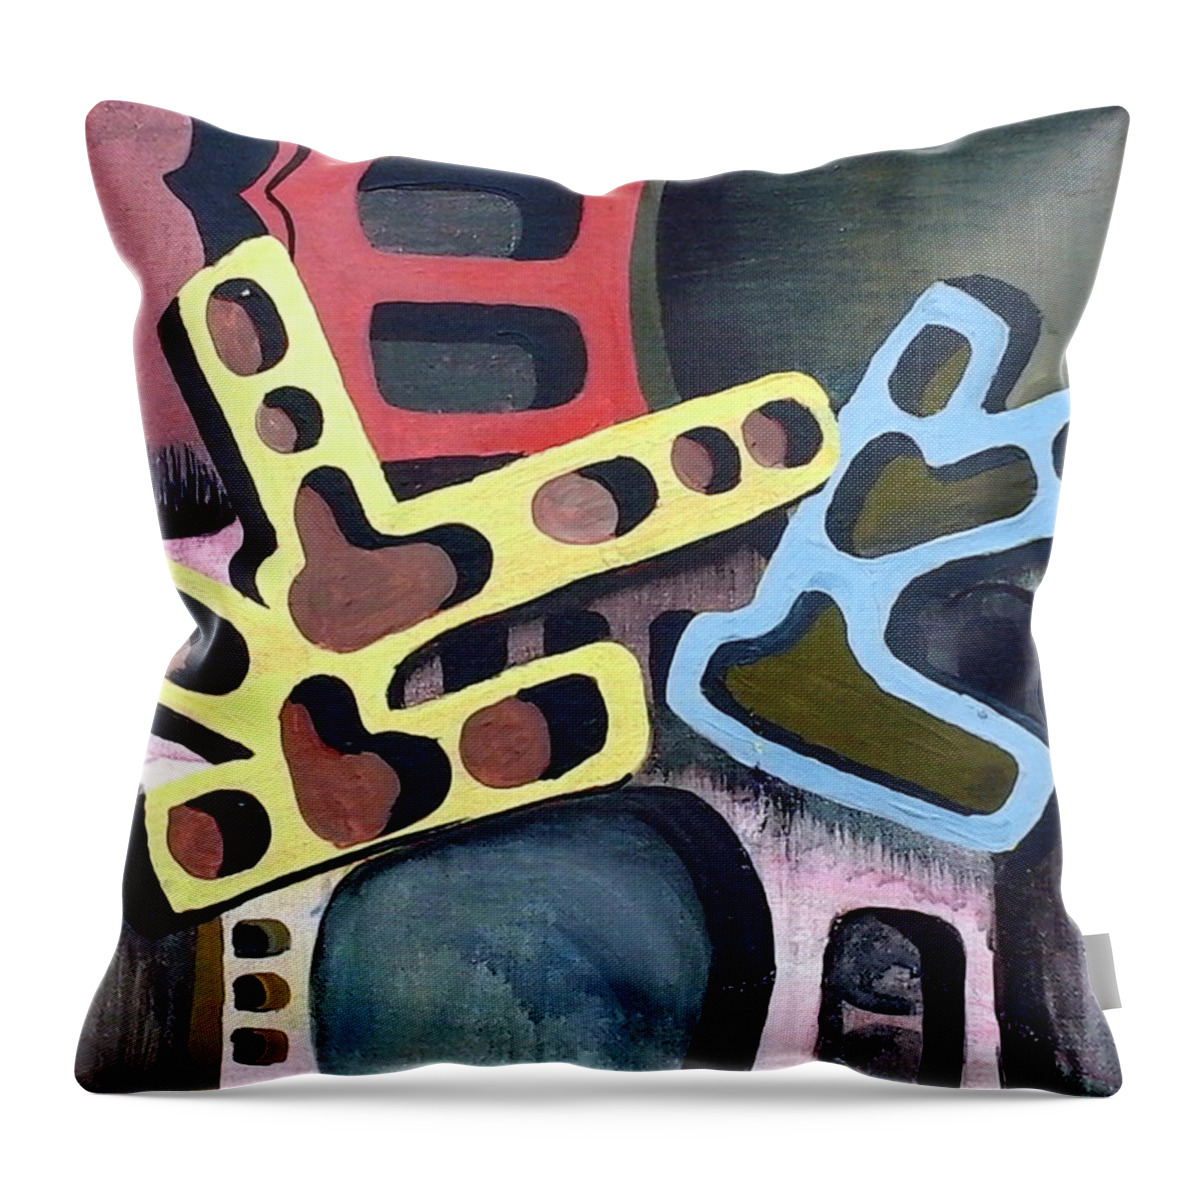 Nonobjective Throw Pillow featuring the painting Nonobjective-700107 by Sam Sidders